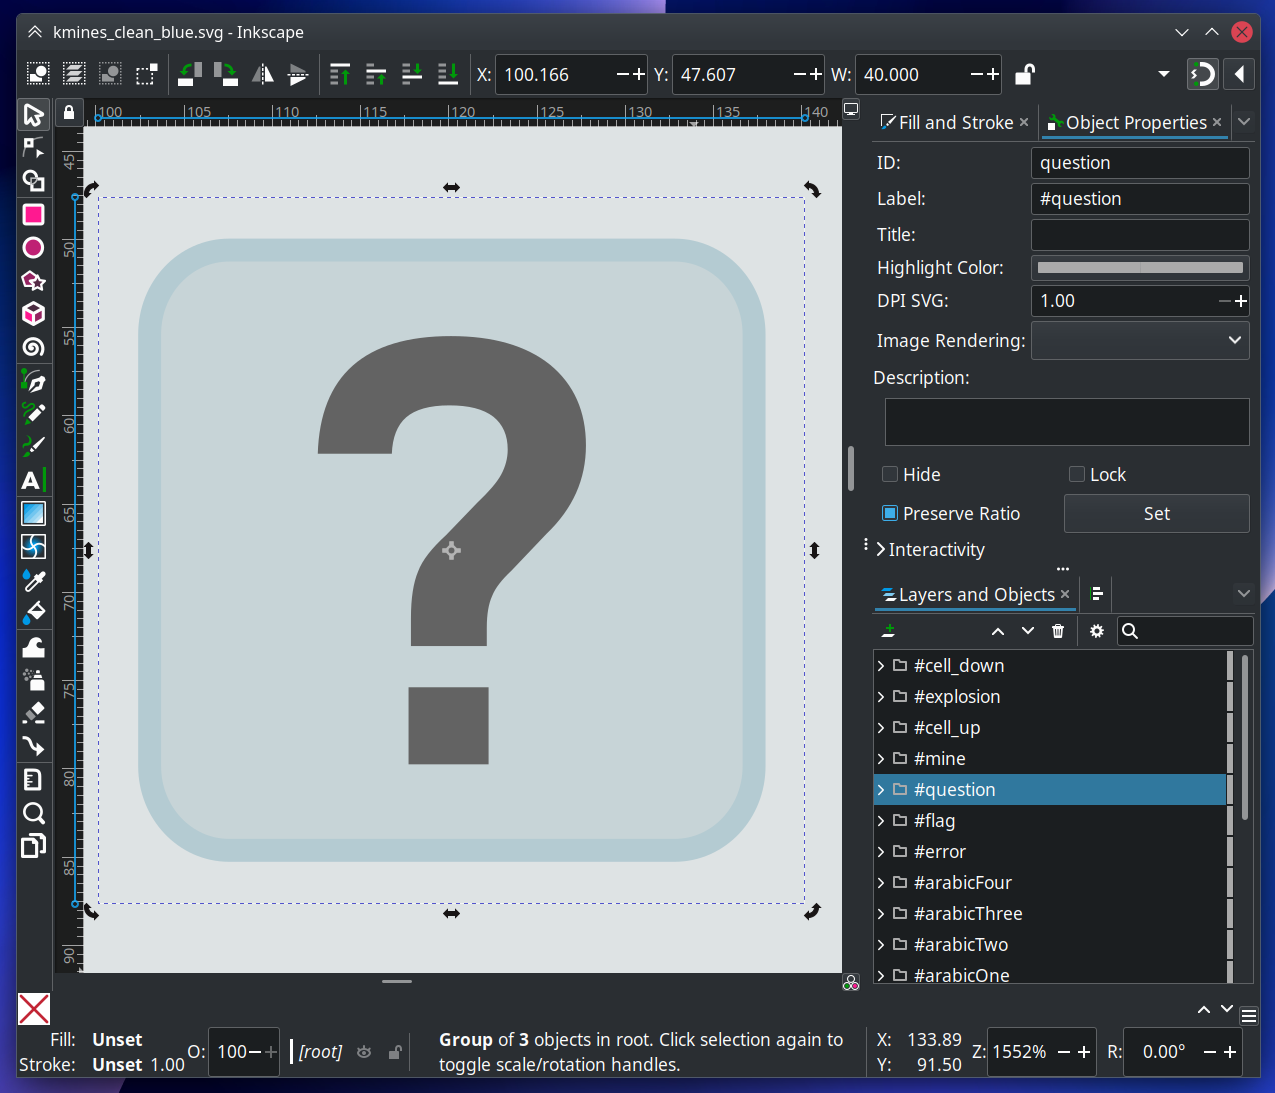 A screenshot showing a selected element and the object properties panel in Inkscape.